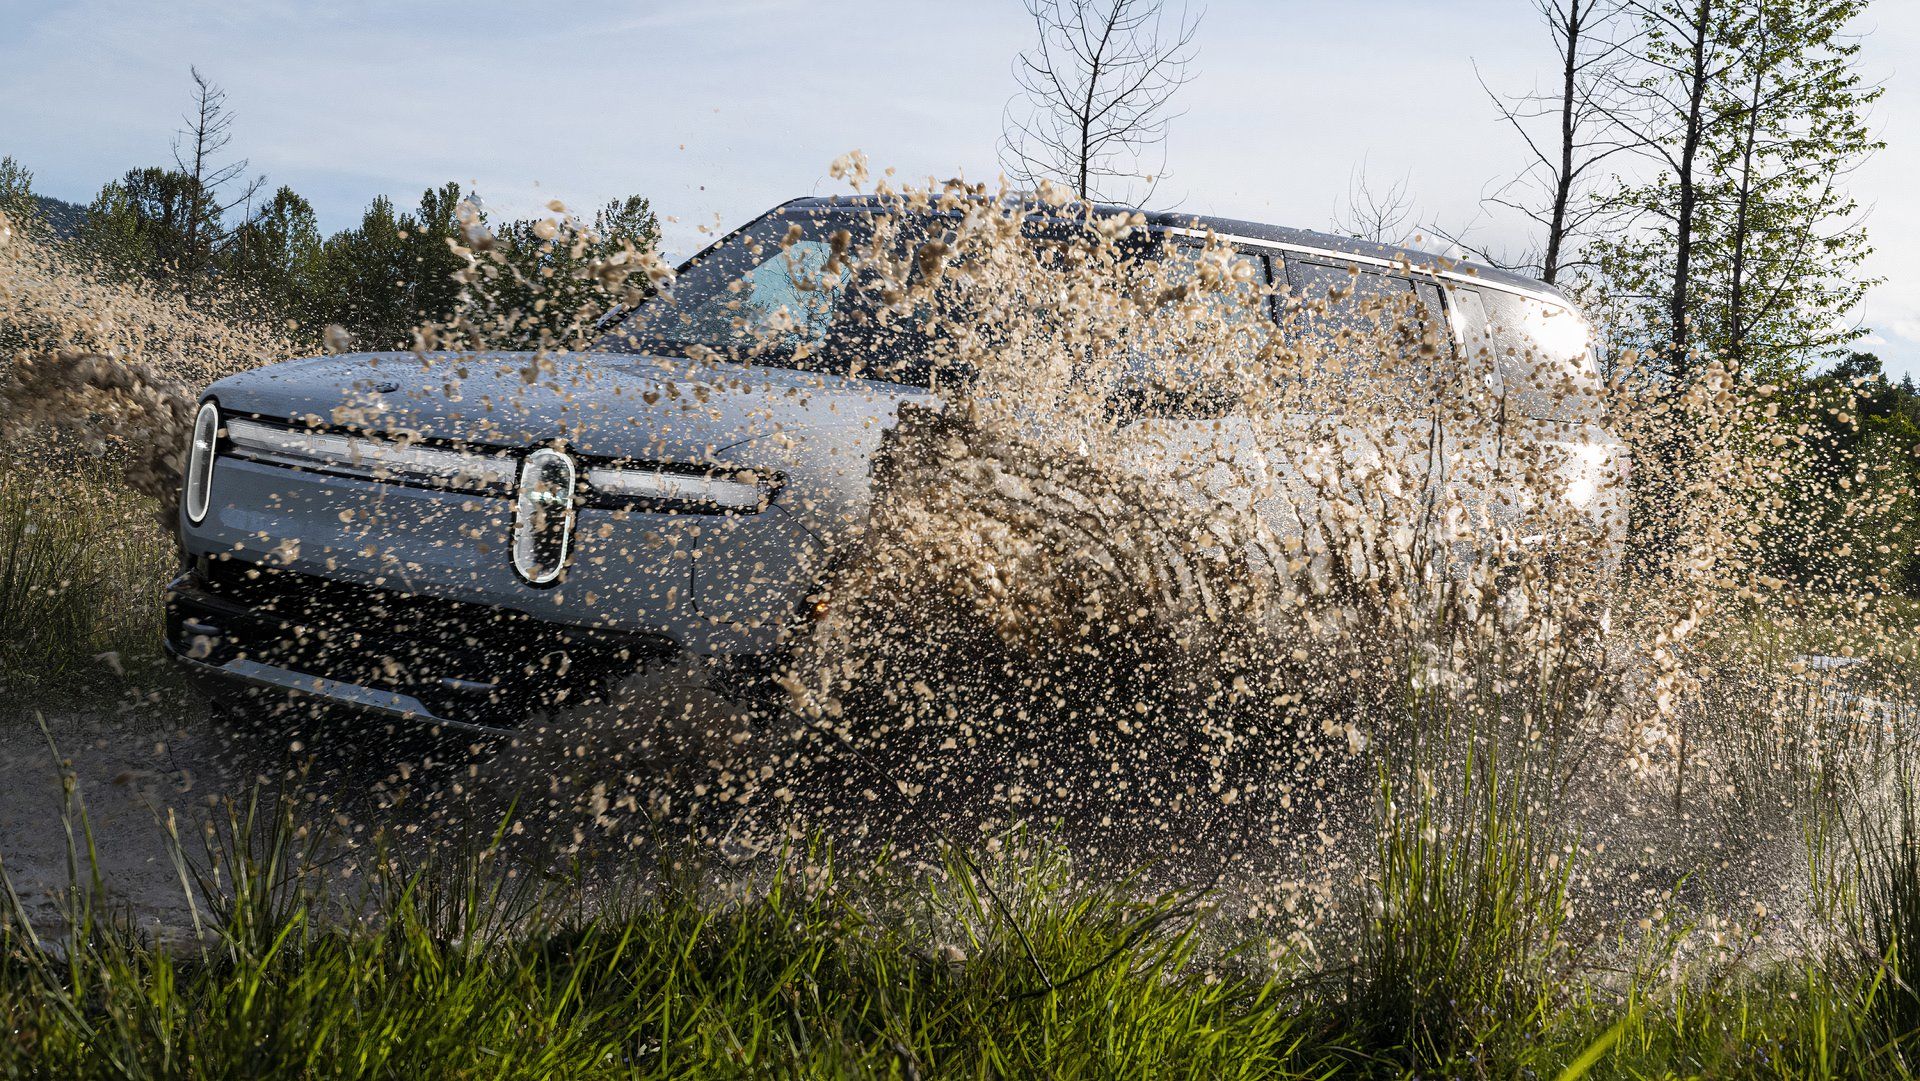 Rivian R1S, front quarter view closeup, splashing mud, obscured from view